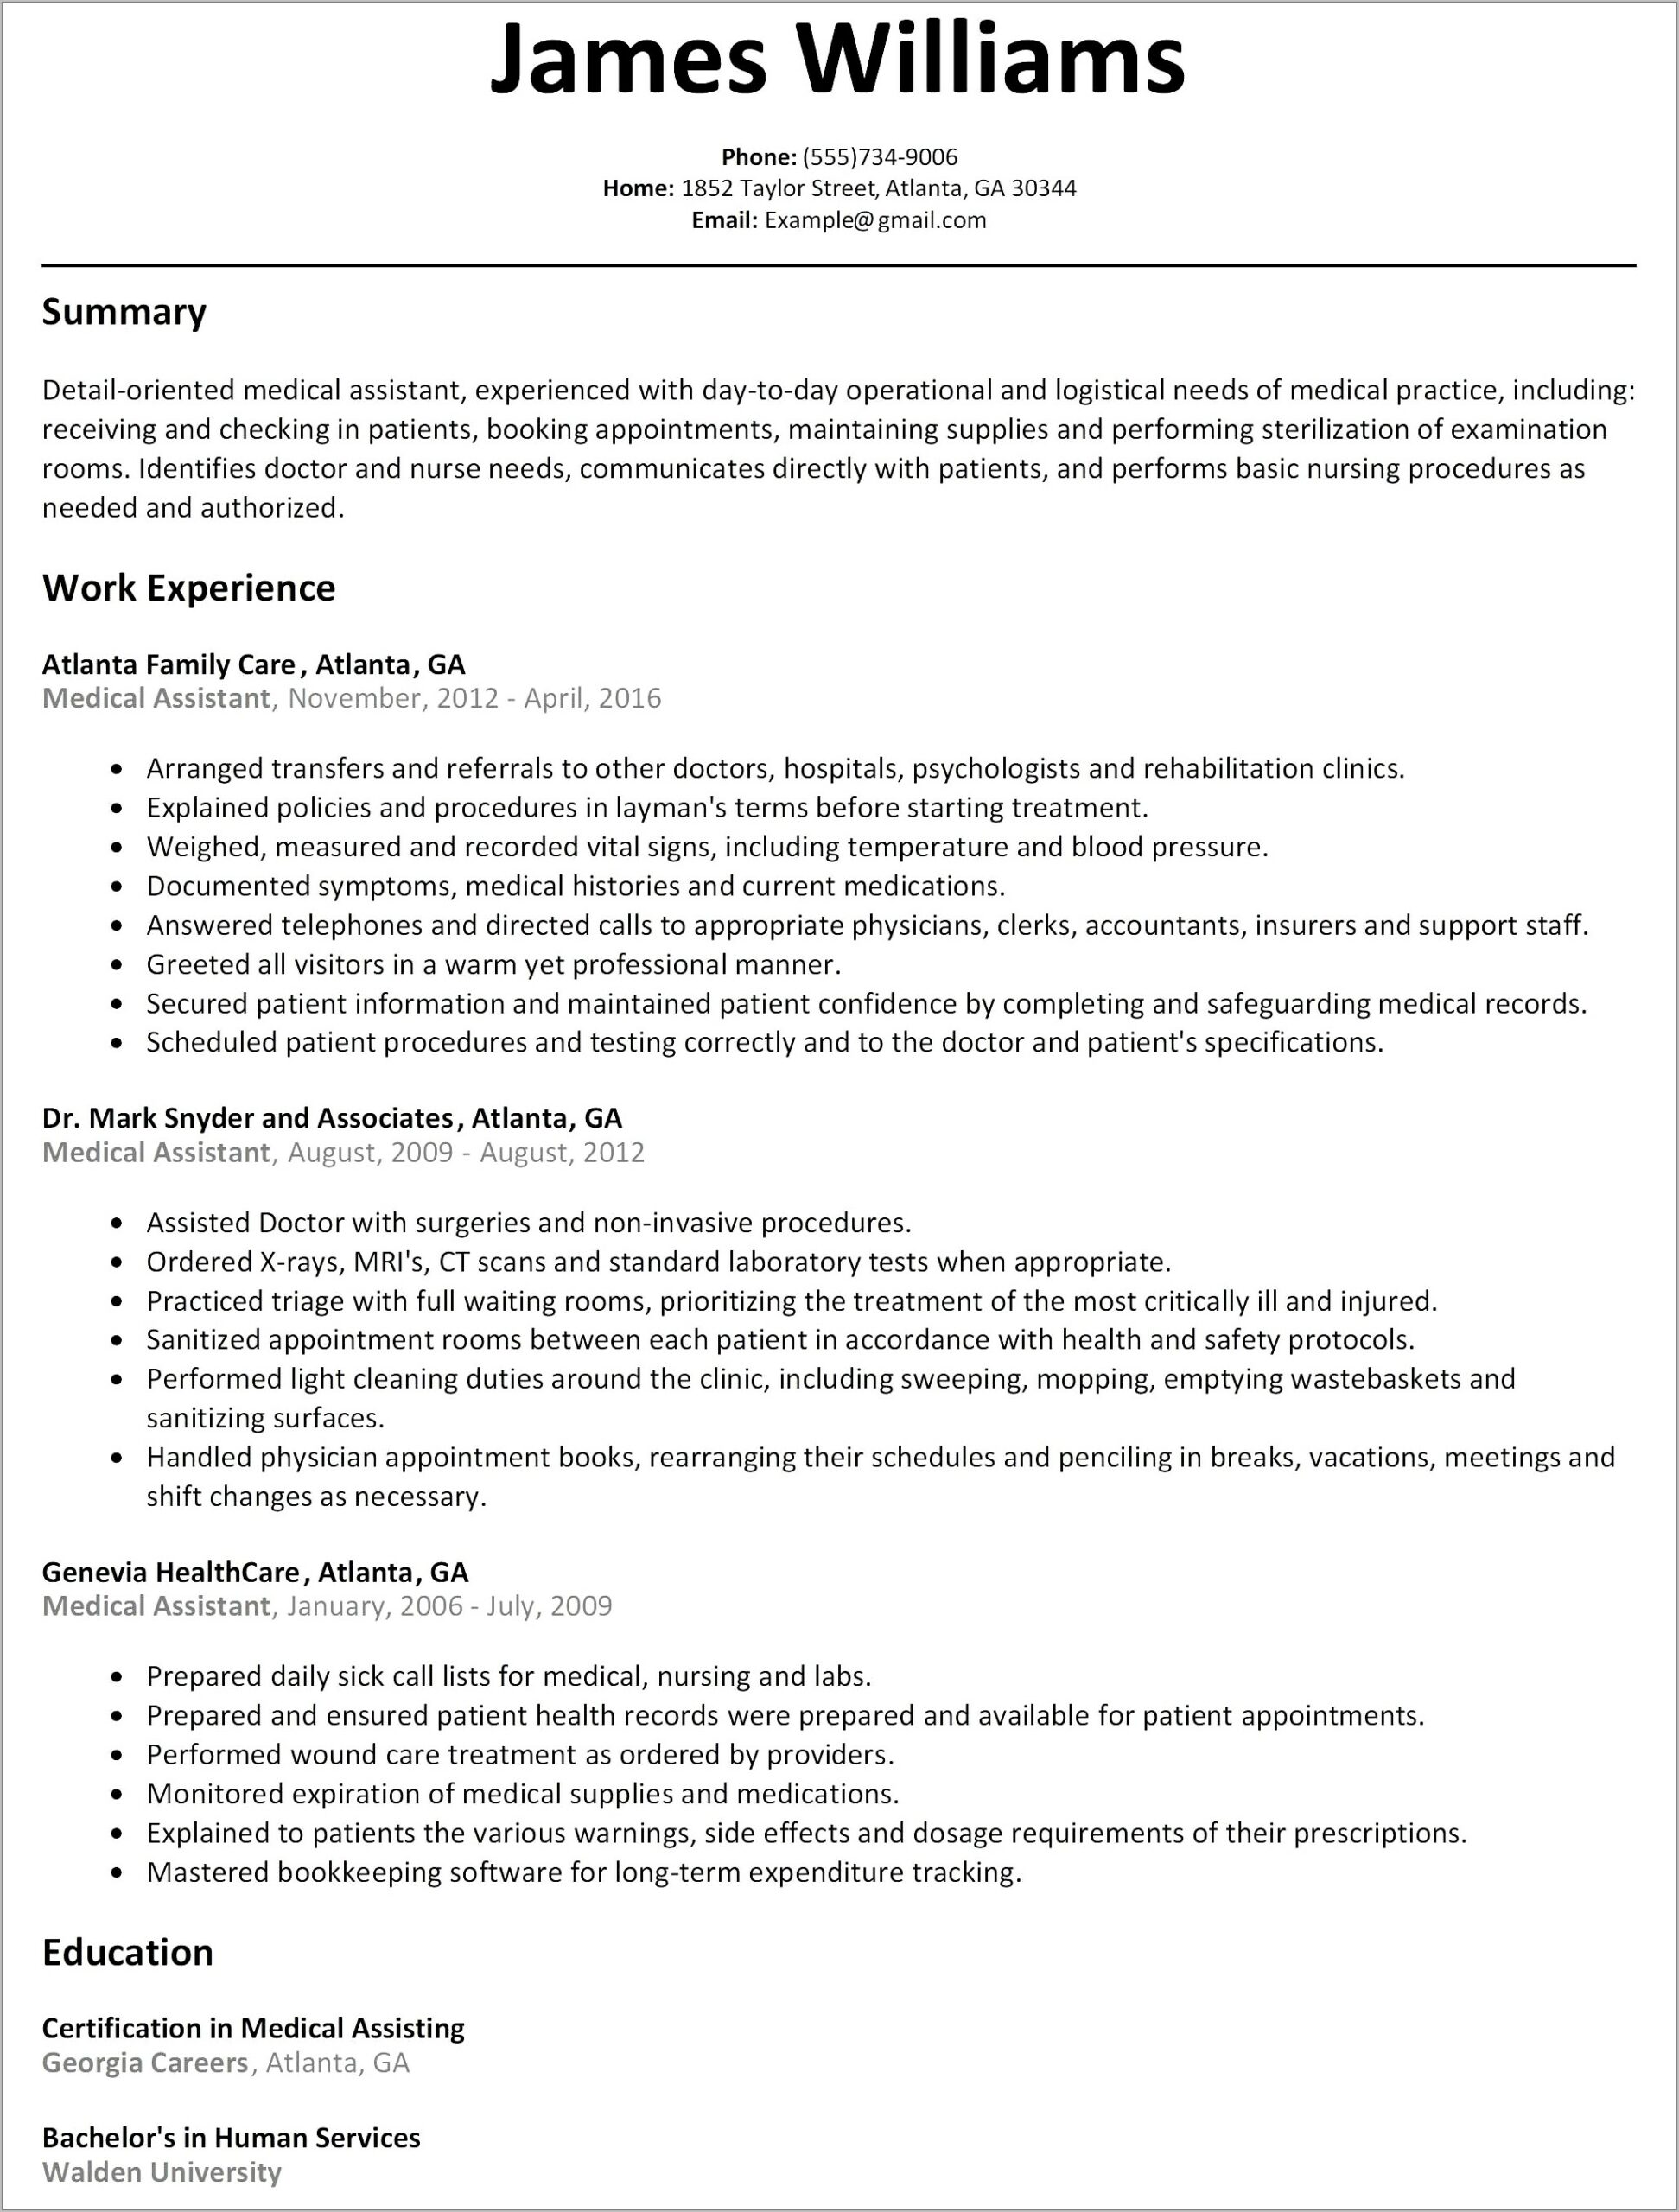 Dental Assistant Resume Template Microsoft Word